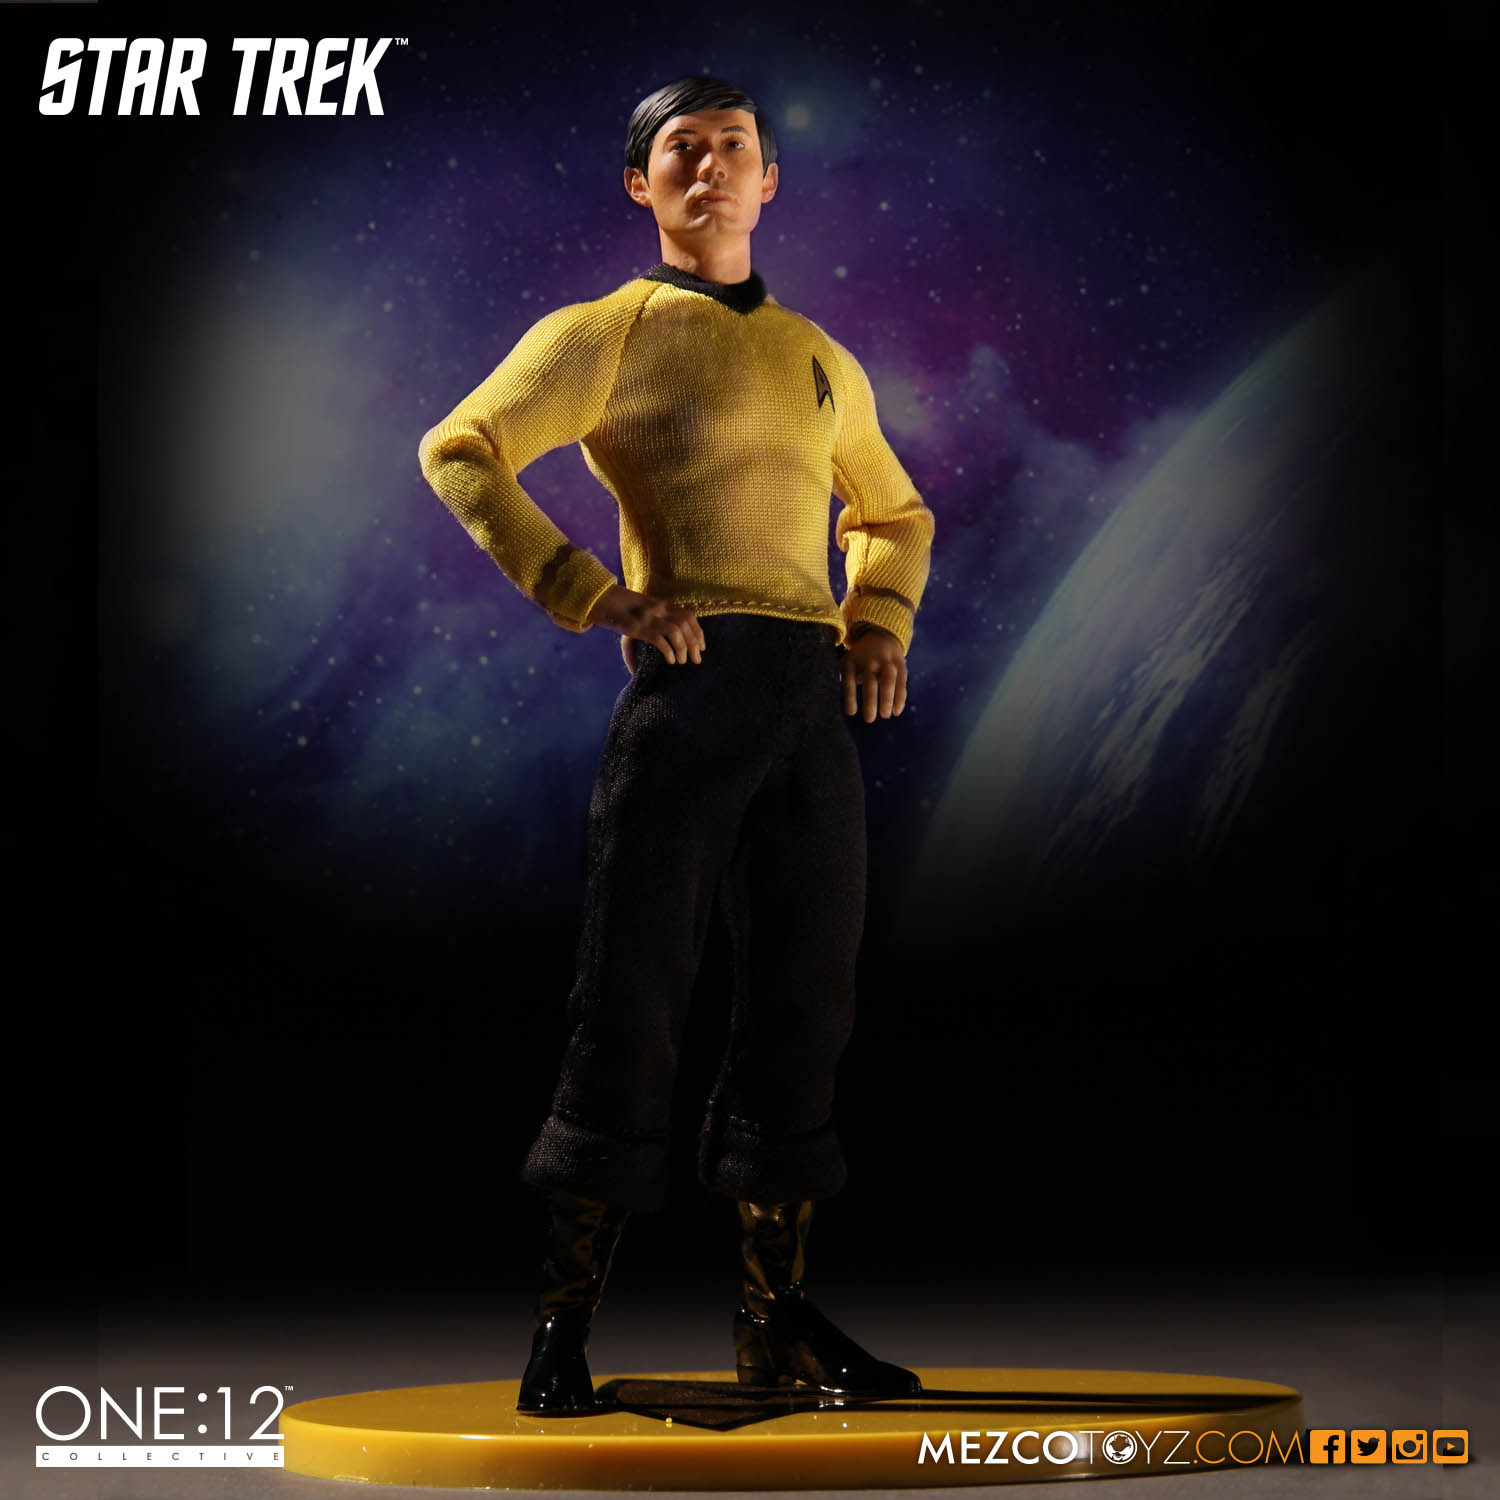 What Happened To Sulu’s Face On Mezco’s New Star Trek Toy?